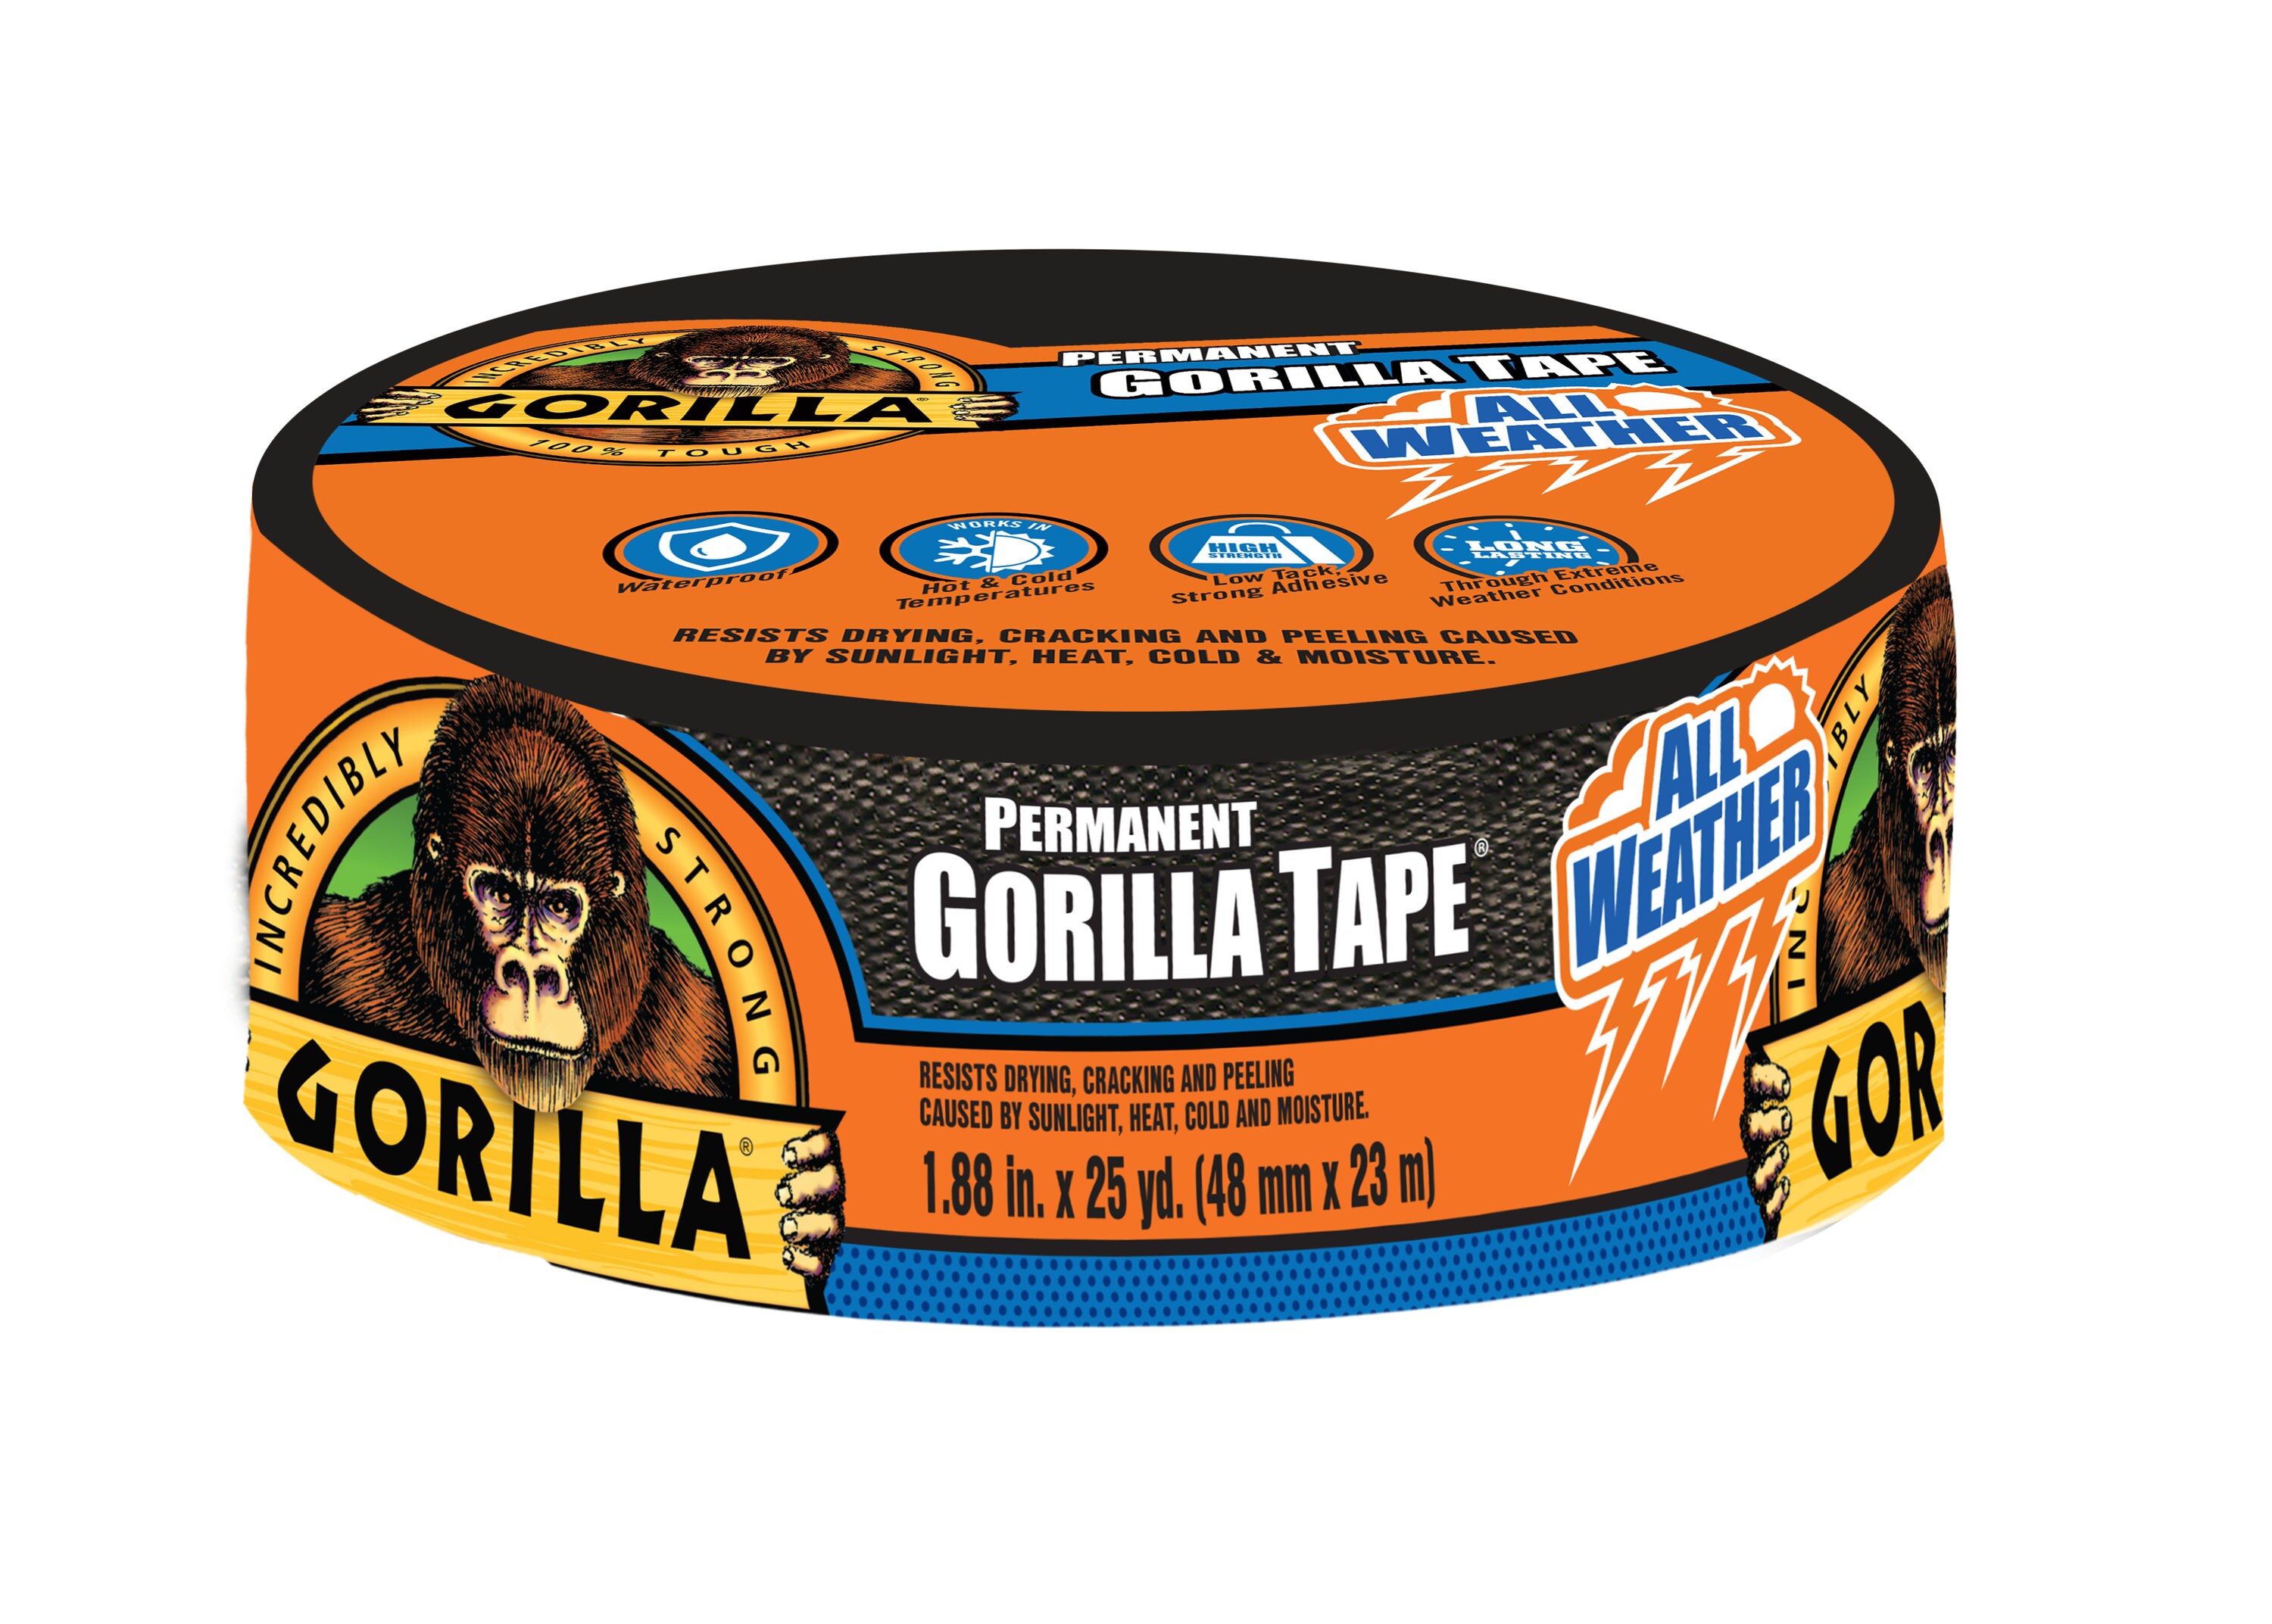 UV and Temperature Resistant Black 1 1.88 x 25 yd Gorilla All Weather Outdoor Waterproof Duct Tape